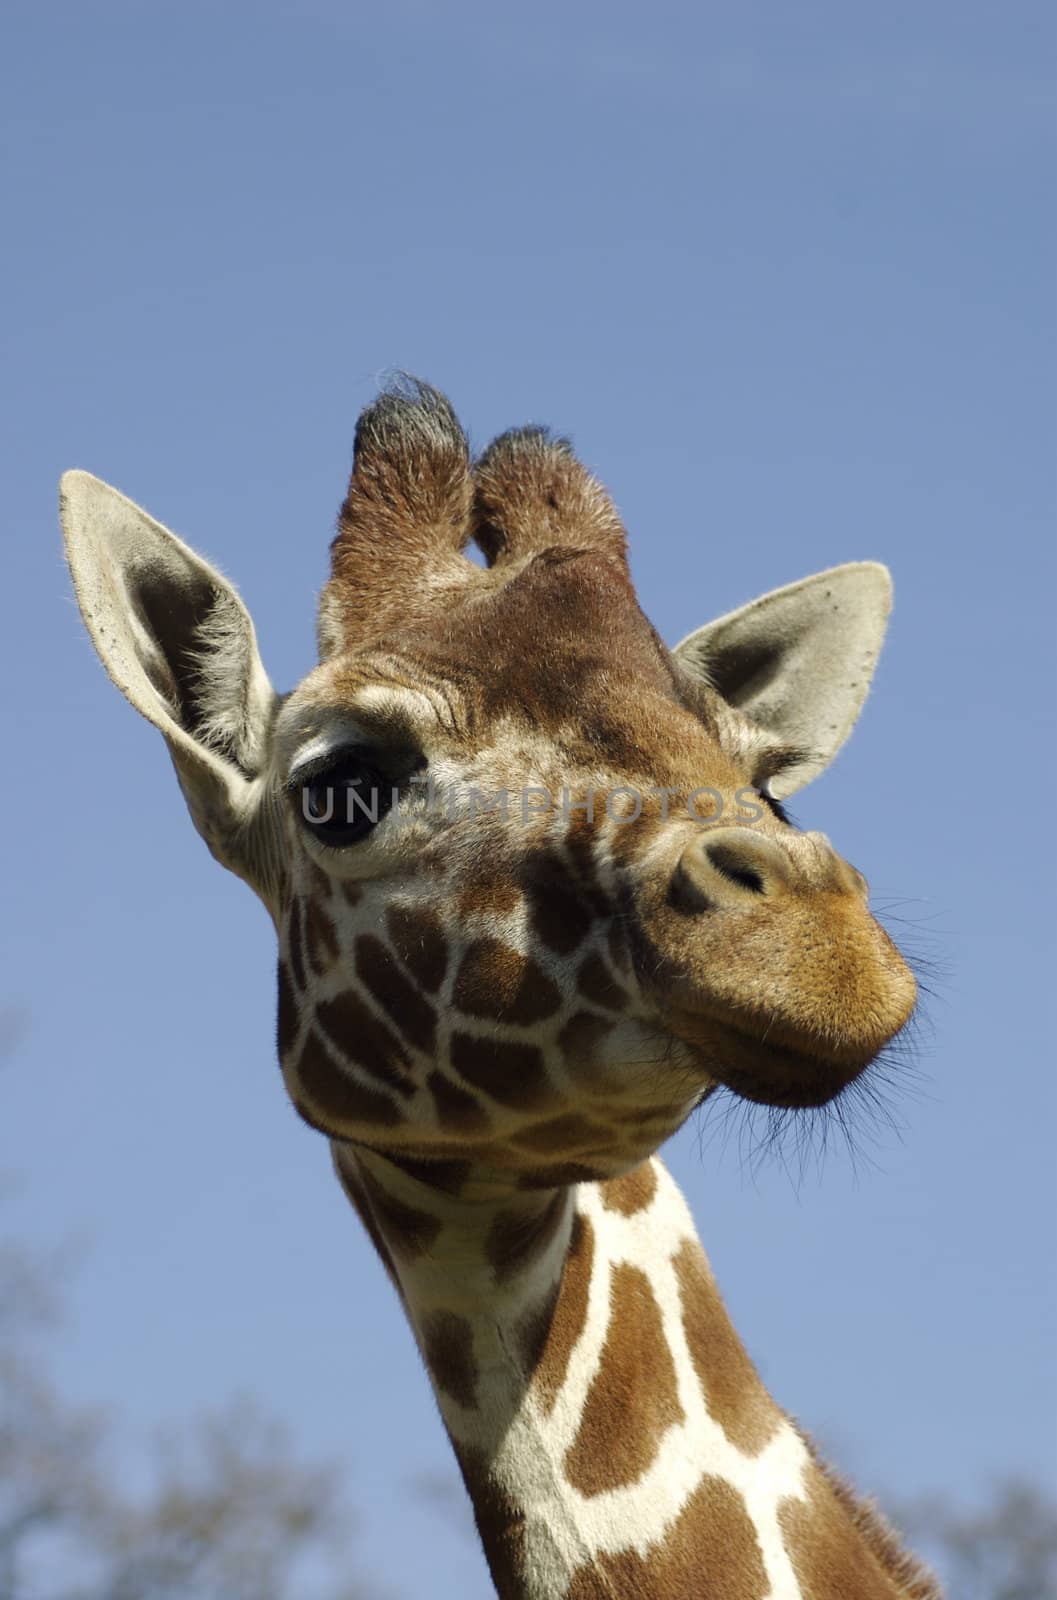 Close up shot of a giraffe's head, face and neck against a blue sky with copy space.